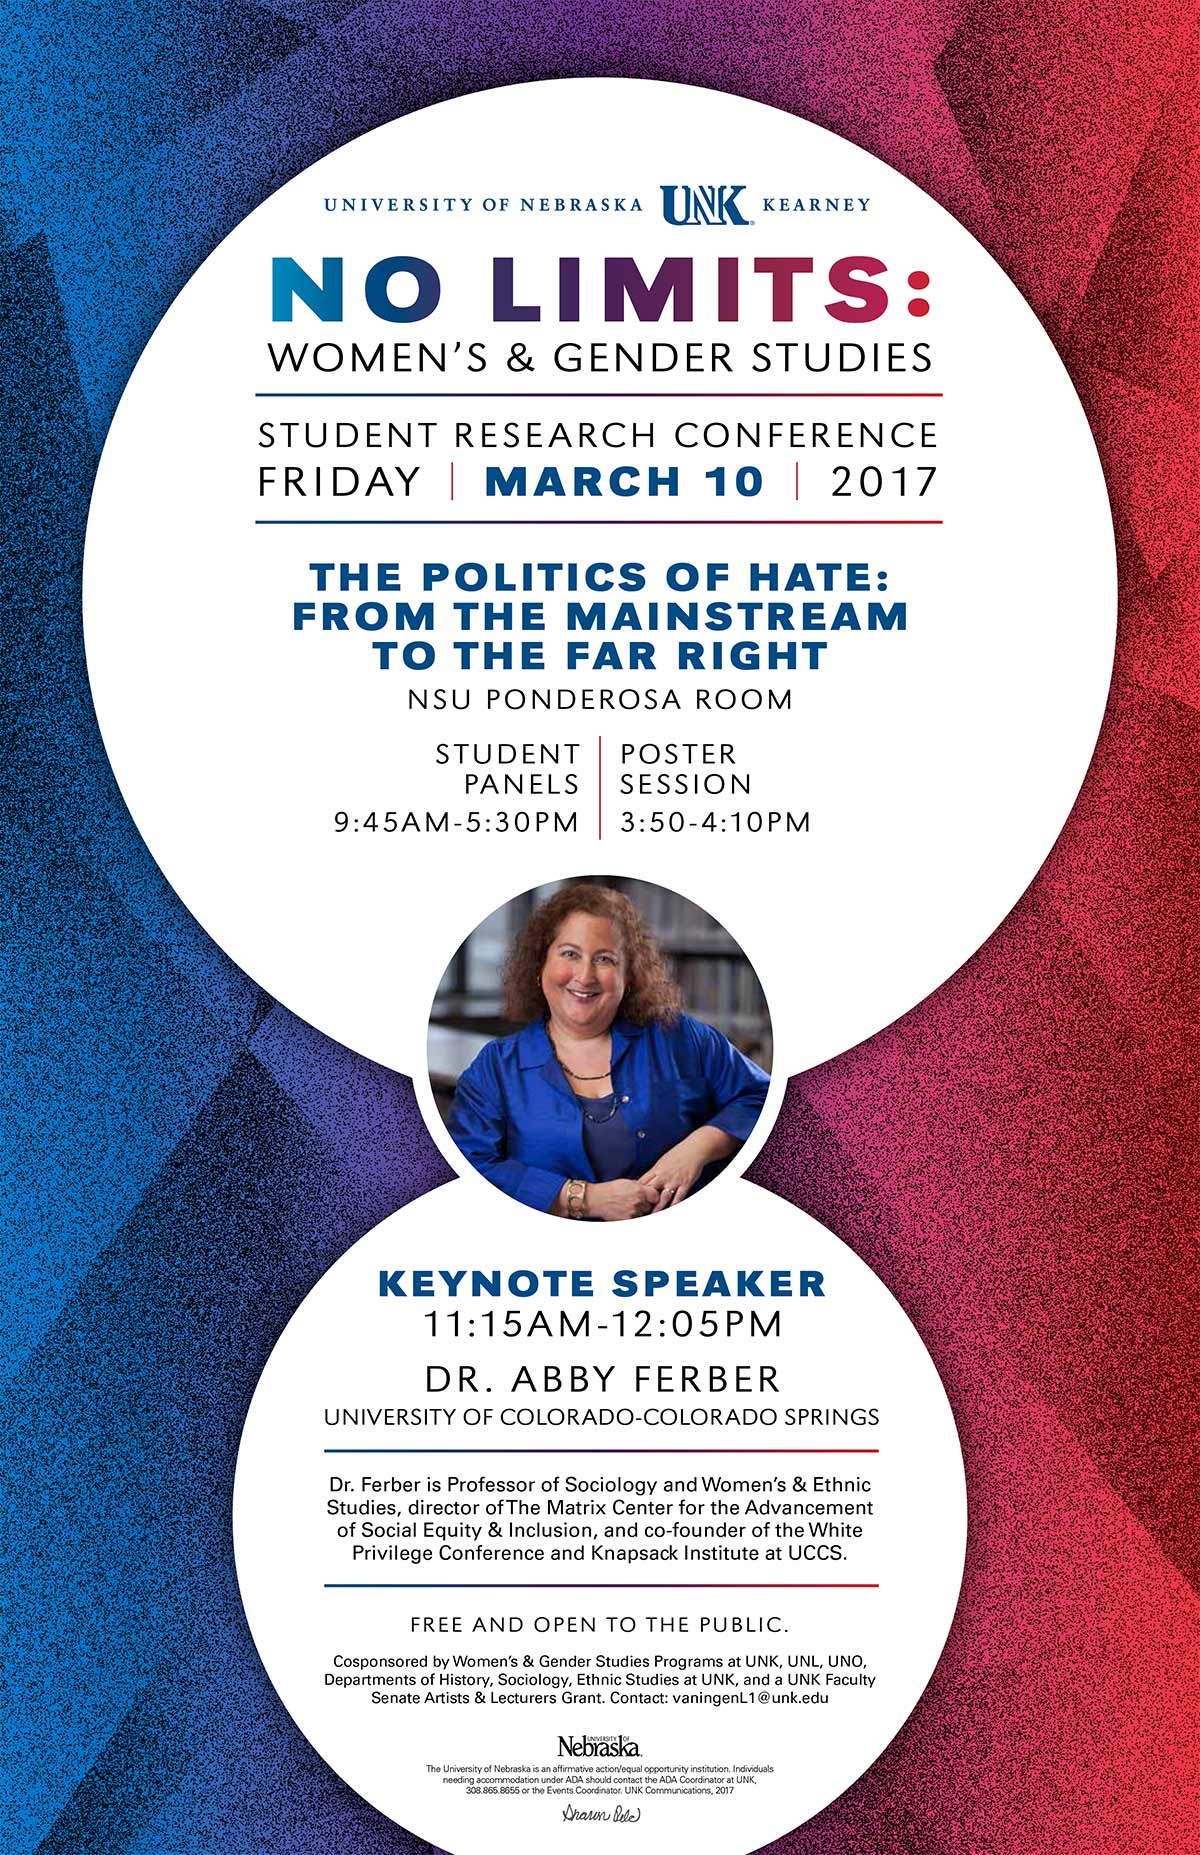 No Limits: Women's and Gender Studies Conference event flyer; Friday, March 10, 11:15 a.m., Keynote Speaker Abby Ferber